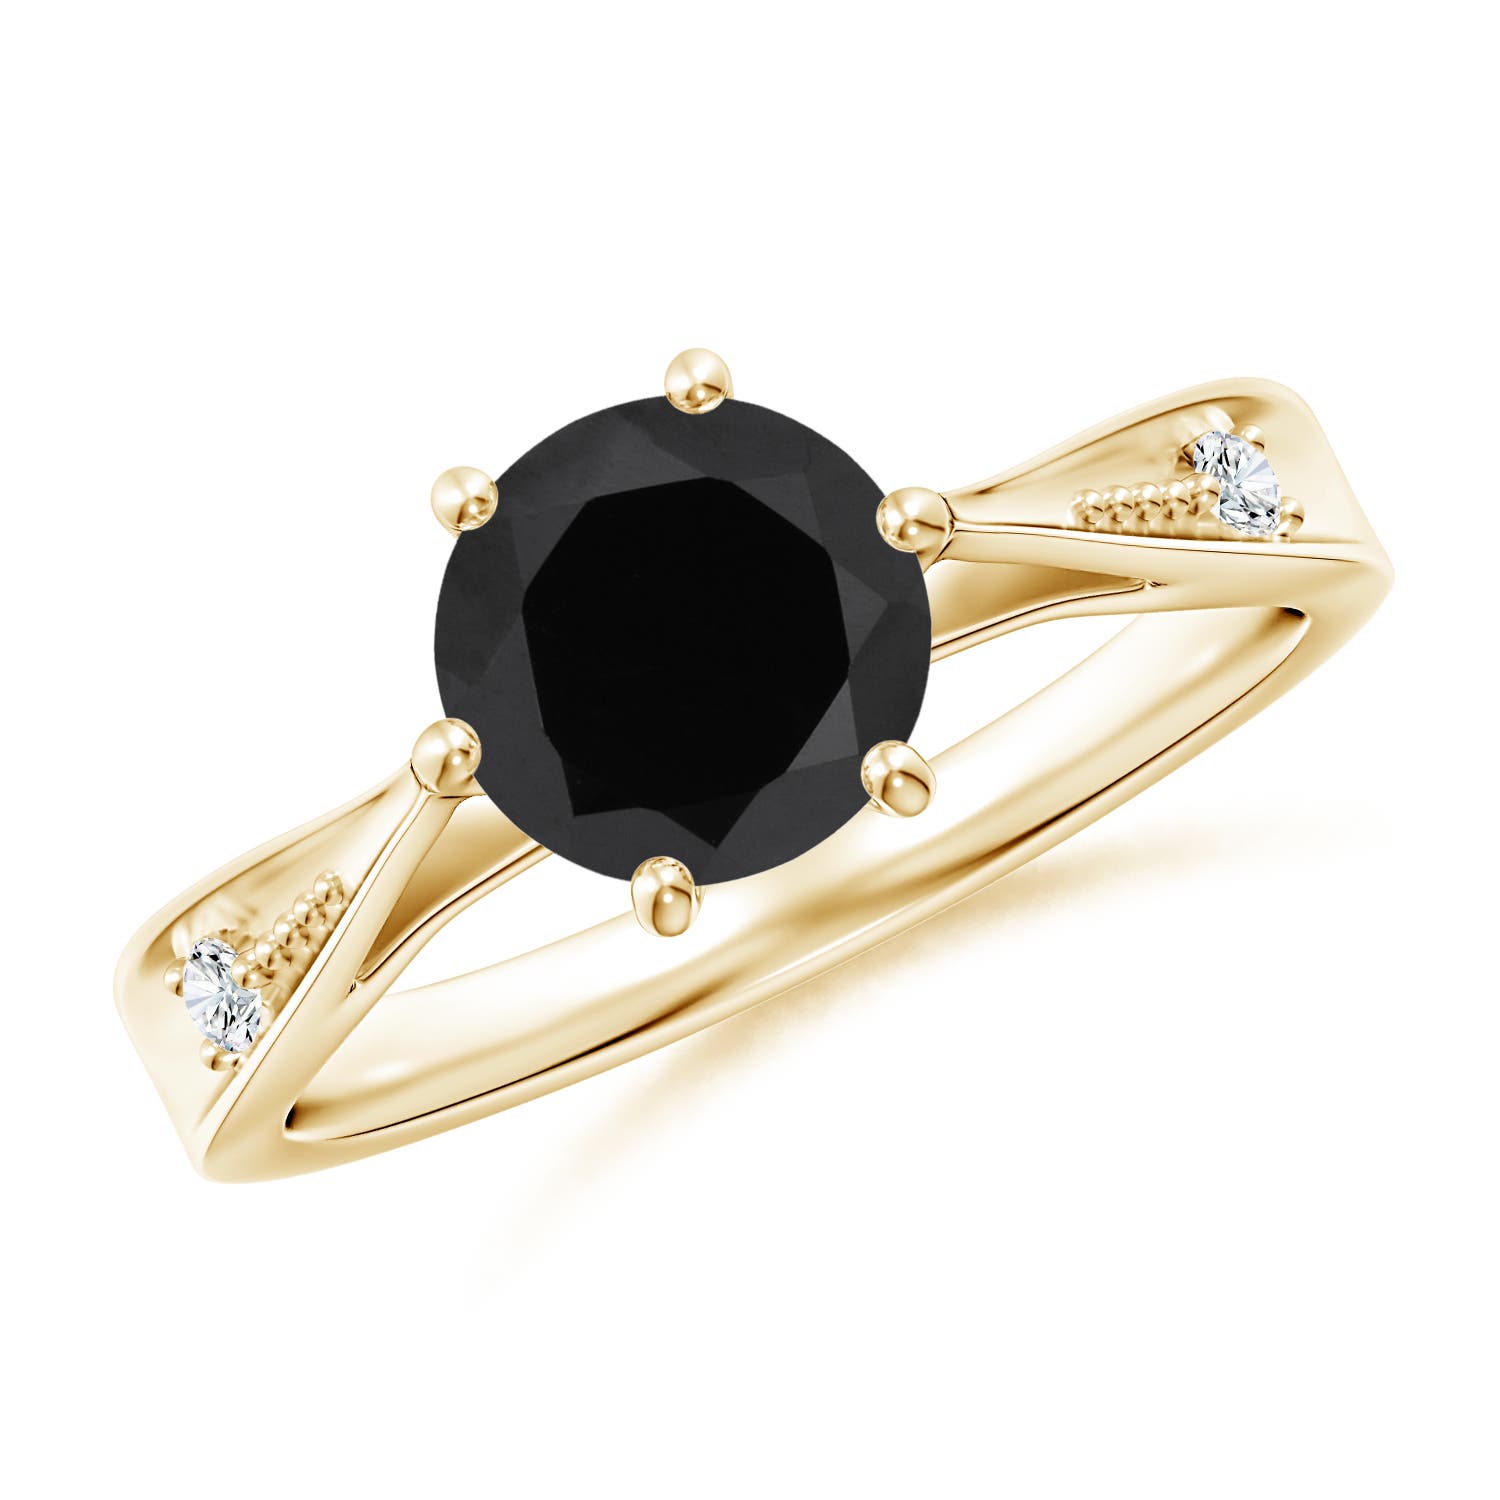 Shop Black Onyx Rings for Her in Canada | Angara